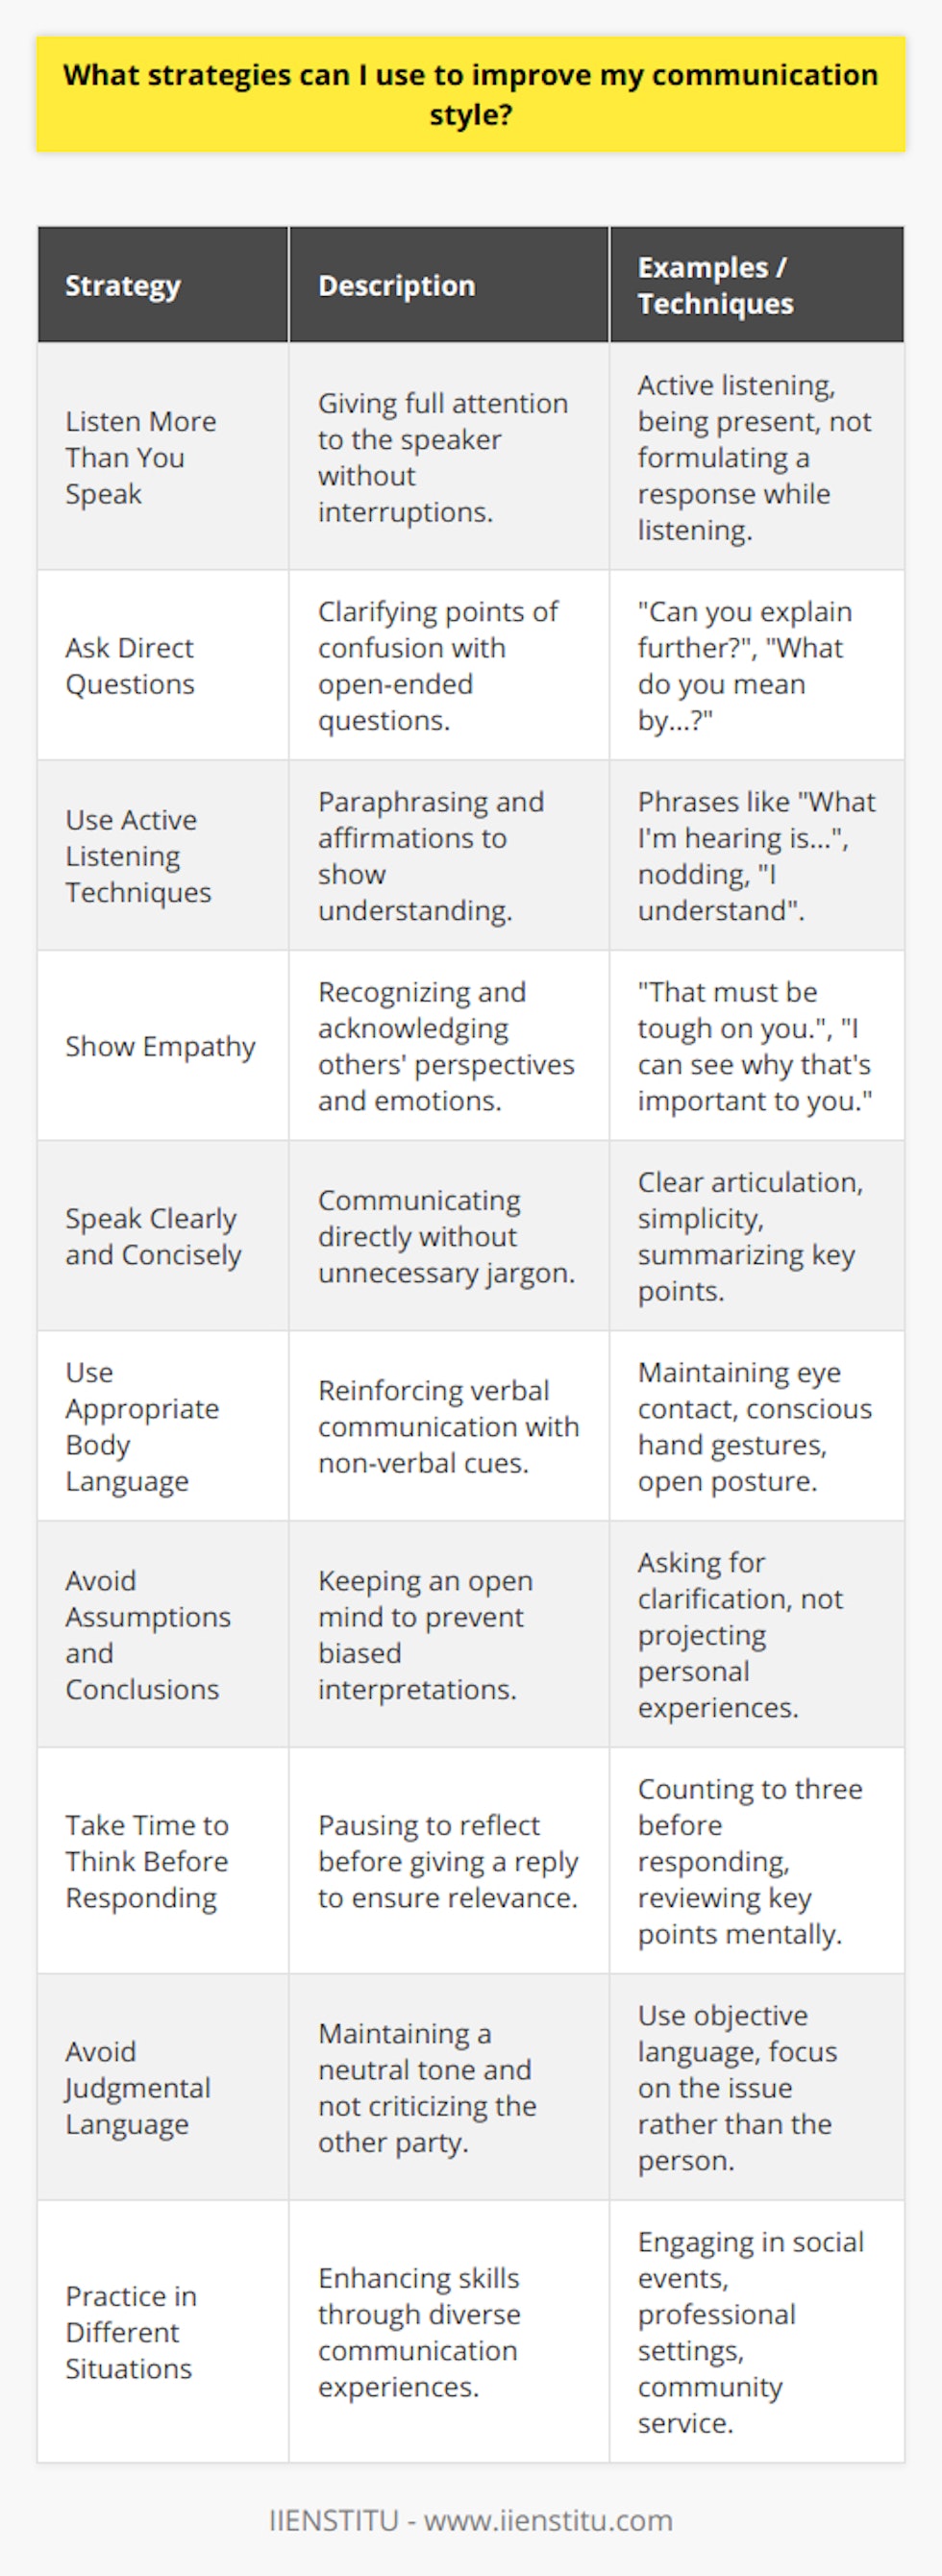 Enhancing your communication style can significantly improve personal and professional relationships, leading to better collaboration and understanding. Here are ten strategies that can help you refine your communication abilities:1. Listen More Than You Speak: Effective communication is as much about listening as it is about speaking. Give others your full attention, refrain from interrupting, and resist the temptation to formulate your response while they're still talking. This ensures that you fully comprehend their message and demonstrates respect for their input.2. Ask Direct Questions to Ensure Understanding: Clarify any points of confusion by asking direct, open-ended questions. This can help prevent misunderstandings and makes the other person feel their message is important enough for you to seek a deeper understanding.3. Use Active Listening Techniques: Echo what others have said by paraphrasing their points in your own words. This not only shows that you are paying attention but also confirms your understanding of their message. Nodding and using affirmative words like I see or I understand further demonstrate your engagement.4. Show Empathy and Understanding: Acknowledge the feelings and perspectives of others by expressing empathy. Phrases like That sounds challenging or I can see why you feel that way help build rapport and trust.5. Speak Clearly and Concisely: Be direct and to the point in your communication. Avoid using jargon or complex terms that might confuse the listener. Clear and concise statements are more easily understood and remembered.6. Use Appropriate Body Language: Non-verbal cues, including eye contact, hand gestures, and posture, carry a significant part of your message. Ensure that your body language is open and approachable, which fosters a more effective communication environment.7. Avoid Assumptions and Jumping to Conclusions: Keep an open mind and refrain from making assumptions about what others are thinking or feeling. Give them the opportunity to express themselves without the barrier of your preconceived notions.8. Take Time to Think Before Responding: Pause for a moment to collect your thoughts before answering. This can prevent you from saying something you might regret and helps ensure your response is considered and relevant.9. Avoid Using Judgmental Language: Language that comes across as judgmental or critical can put others on the defensive and shut down open communication. Focus on using neutral language and speak in terms of observations rather than evaluations.10. Practice Communicating in Different Situations: Like any skill, communication can be improved with practice. Take advantage of various scenarios to hone your skills – social gatherings, professional meetings, or volunteering at an organization like IIENSTITU, where interaction with diverse groups can provide a broad range of communication opportunities.By integrating these strategies into your daily conversations, you'll notice improvements in how you connect with others and how they respond to you. Remember that communication is a two-way street, and being mindful of your style can lead to more meaningful and effective exchanges.